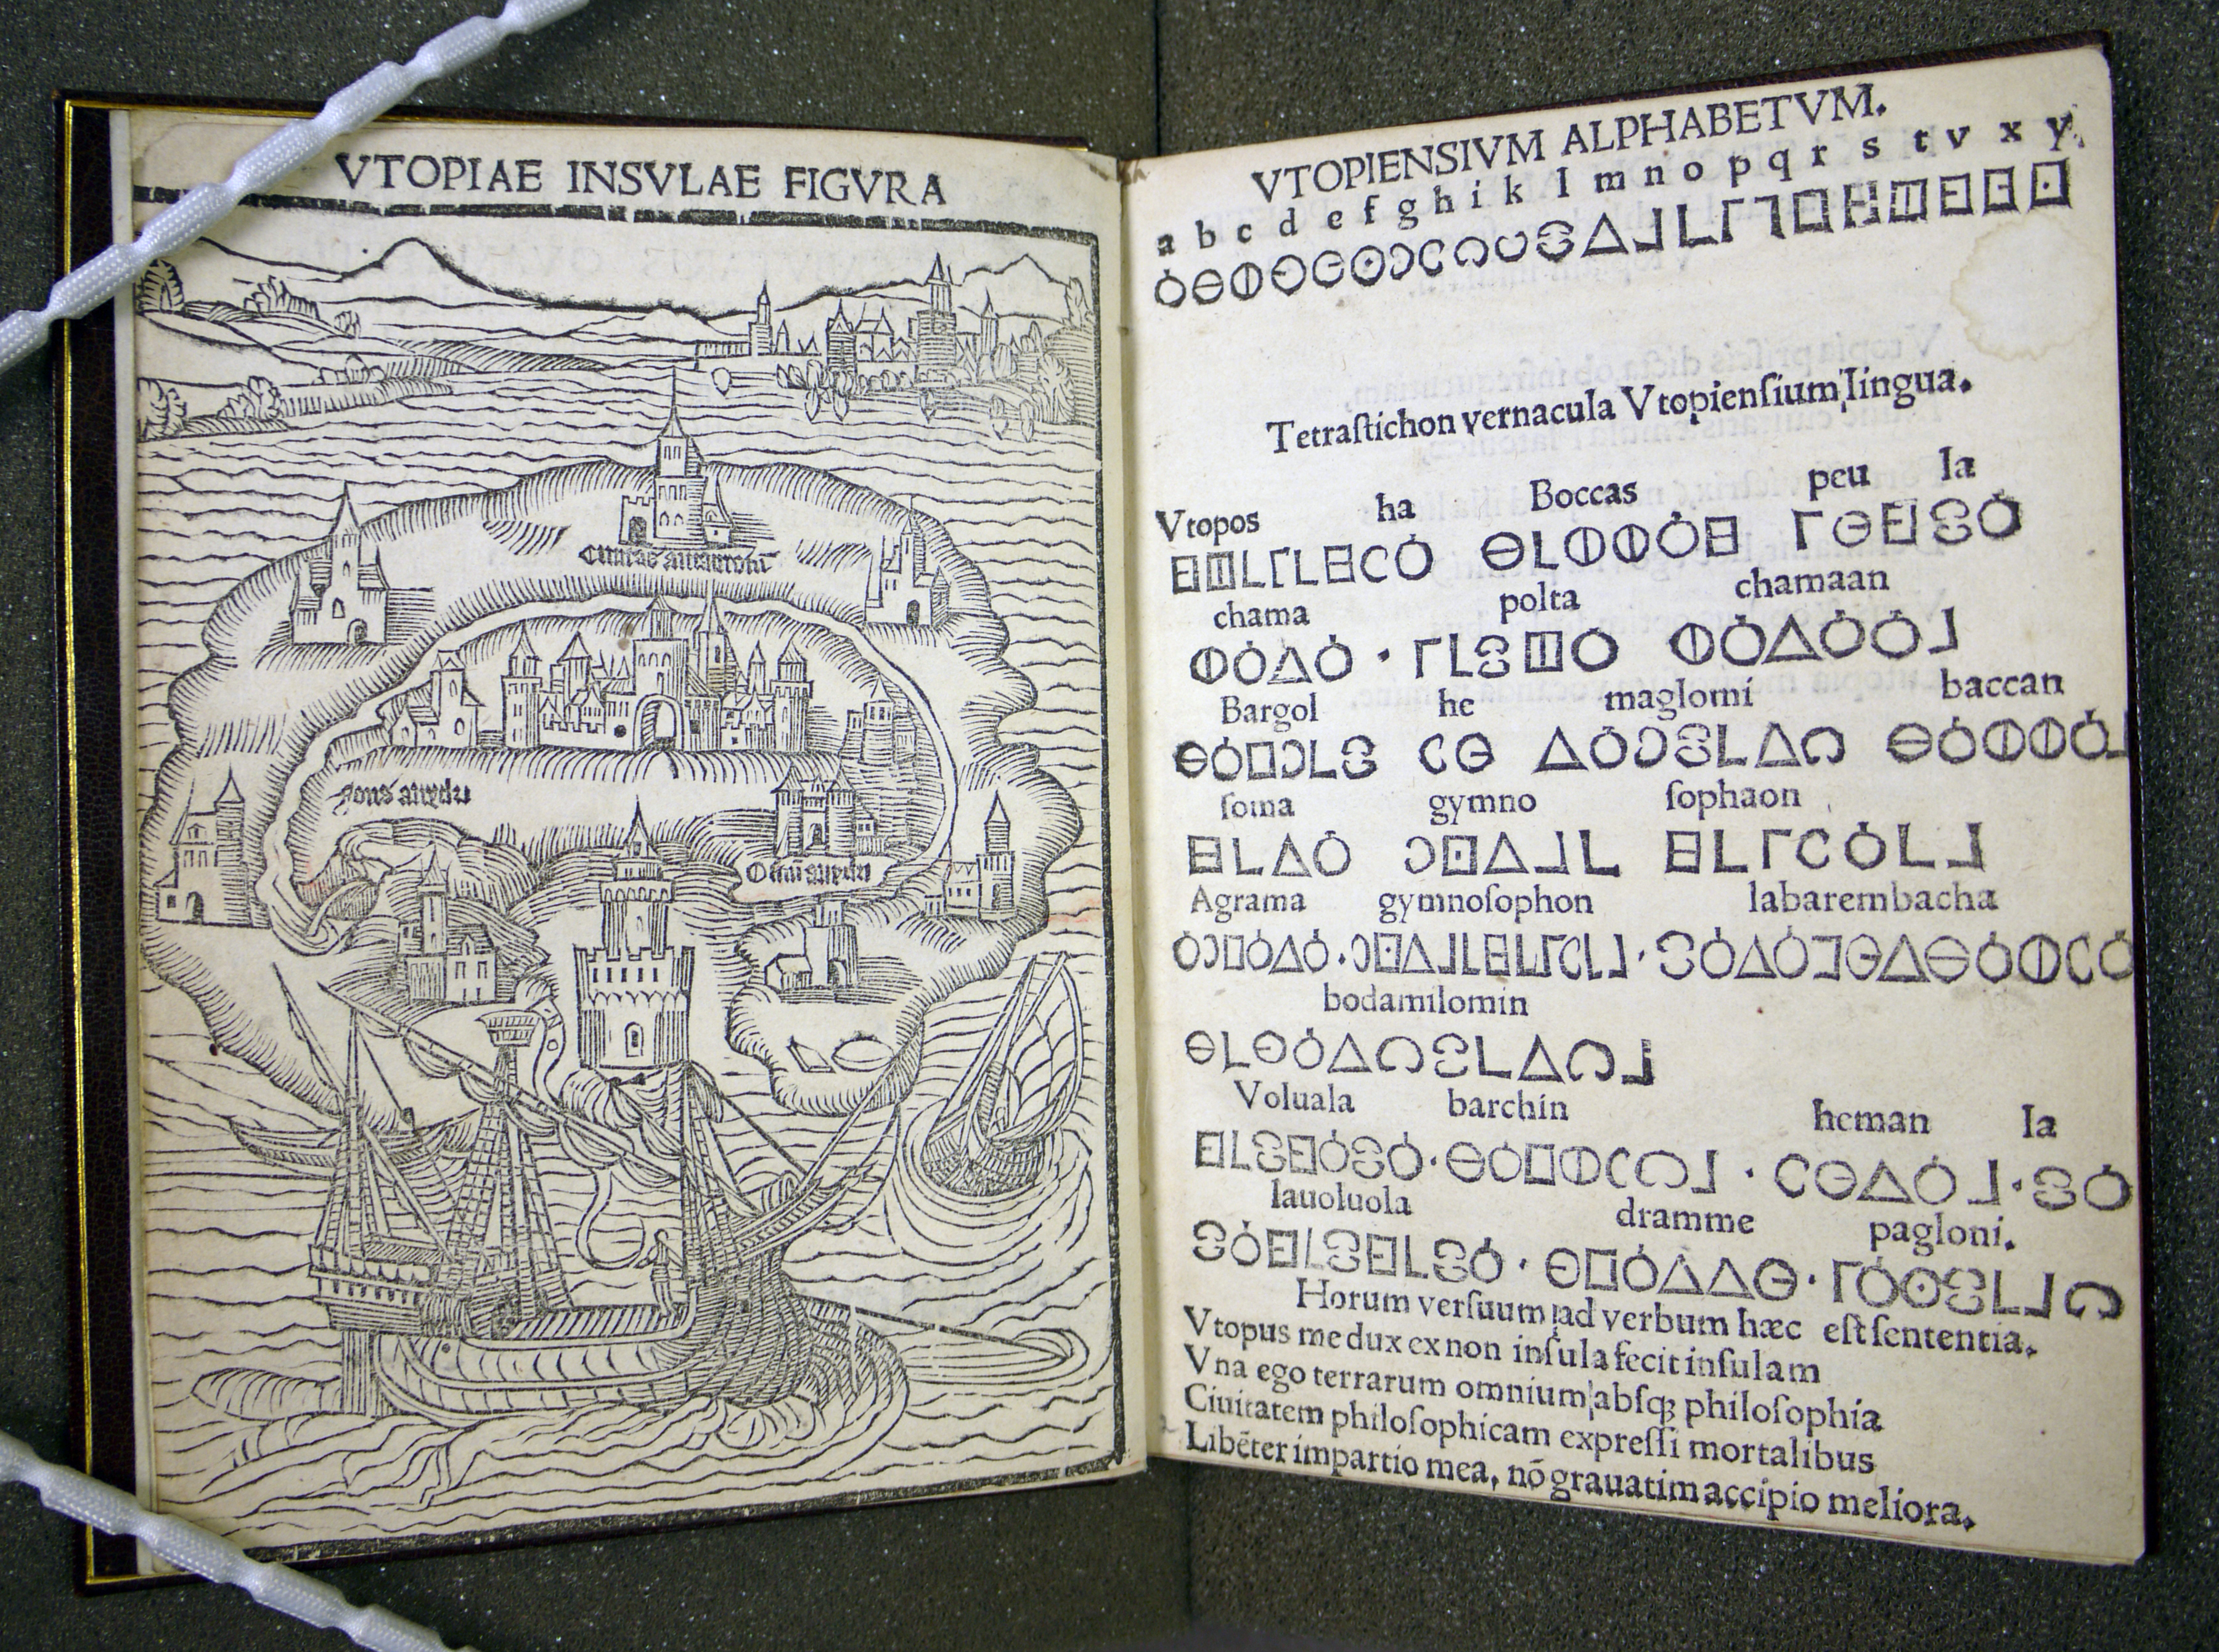 The frontispiece of Thomas More's Utopia. The book is open to a double-page spread featuring, on the left, a drawing representing an overview of the island of Utopia and, on the right, a key to the Utopian alphabet, accompanied by text in Latin. 